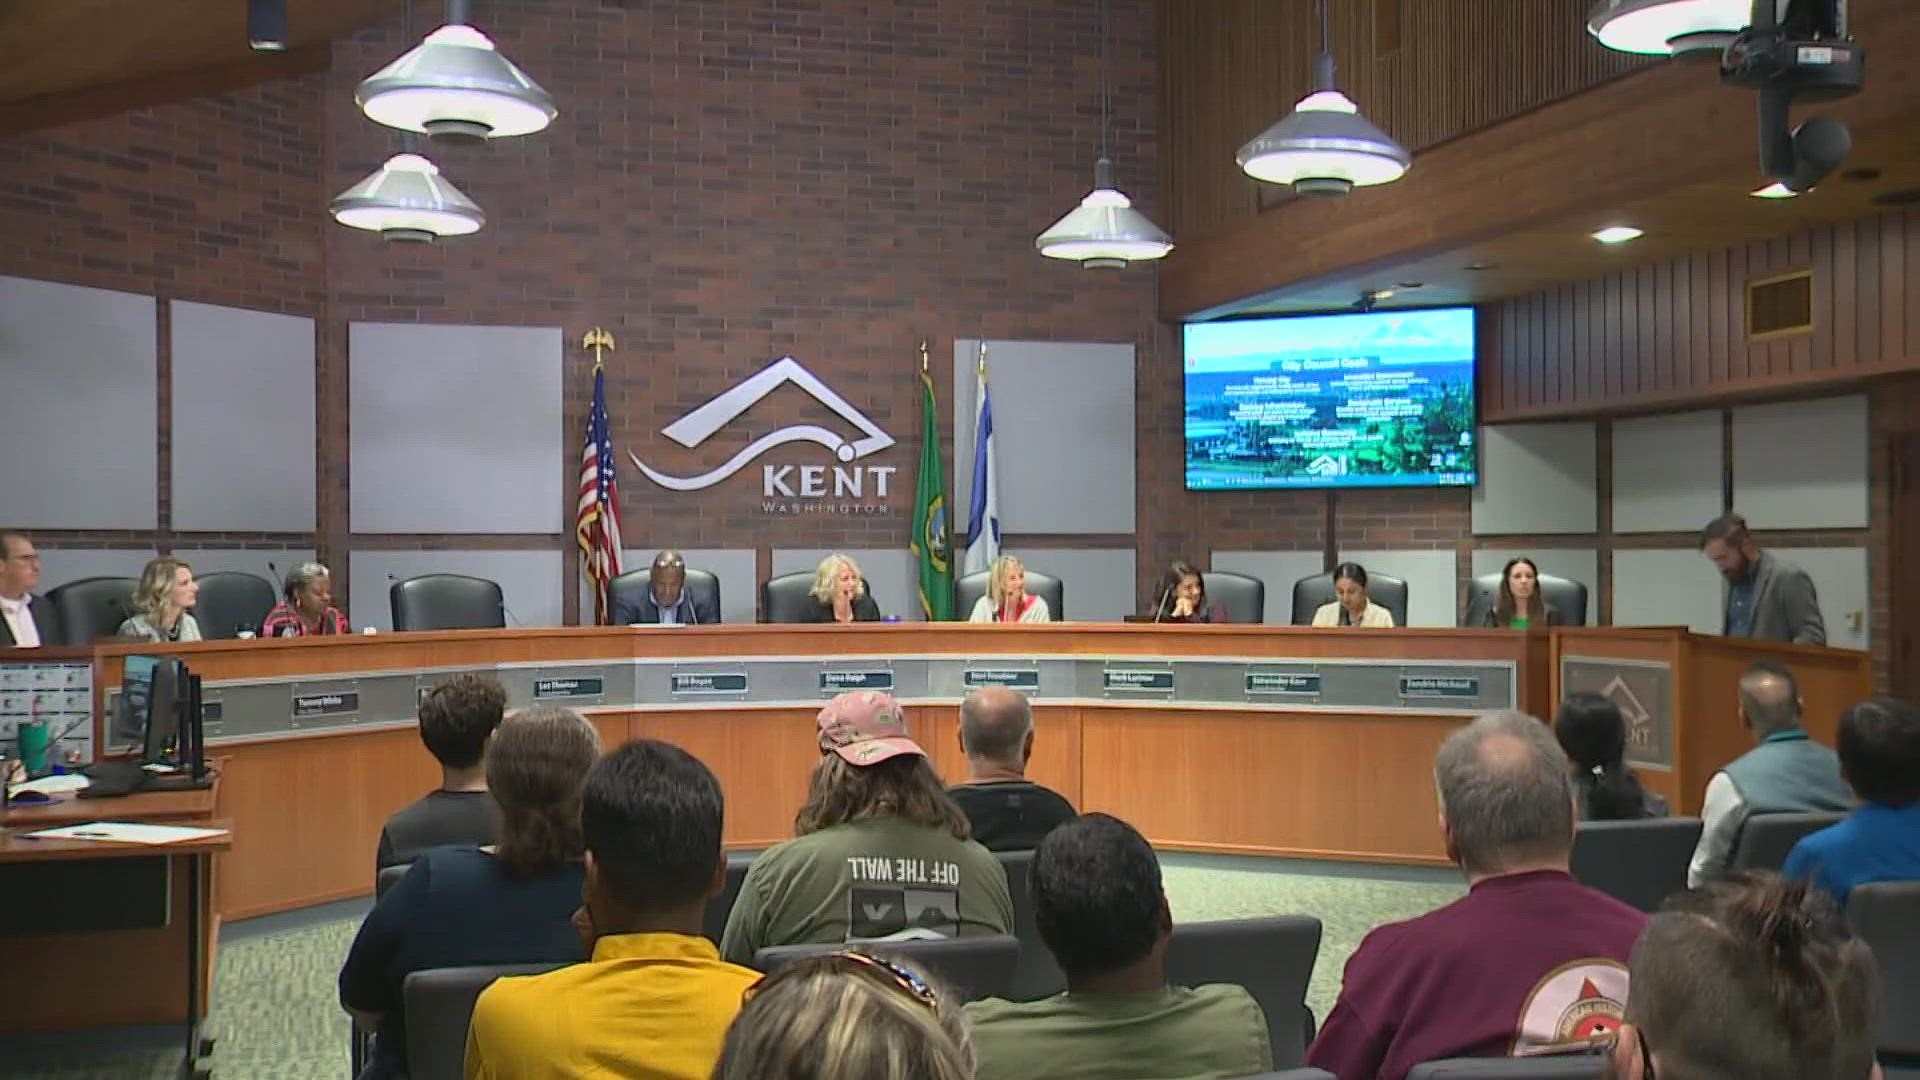 The Kent City Council passed the public camping ban after a rise in complaints from business owners and community members.